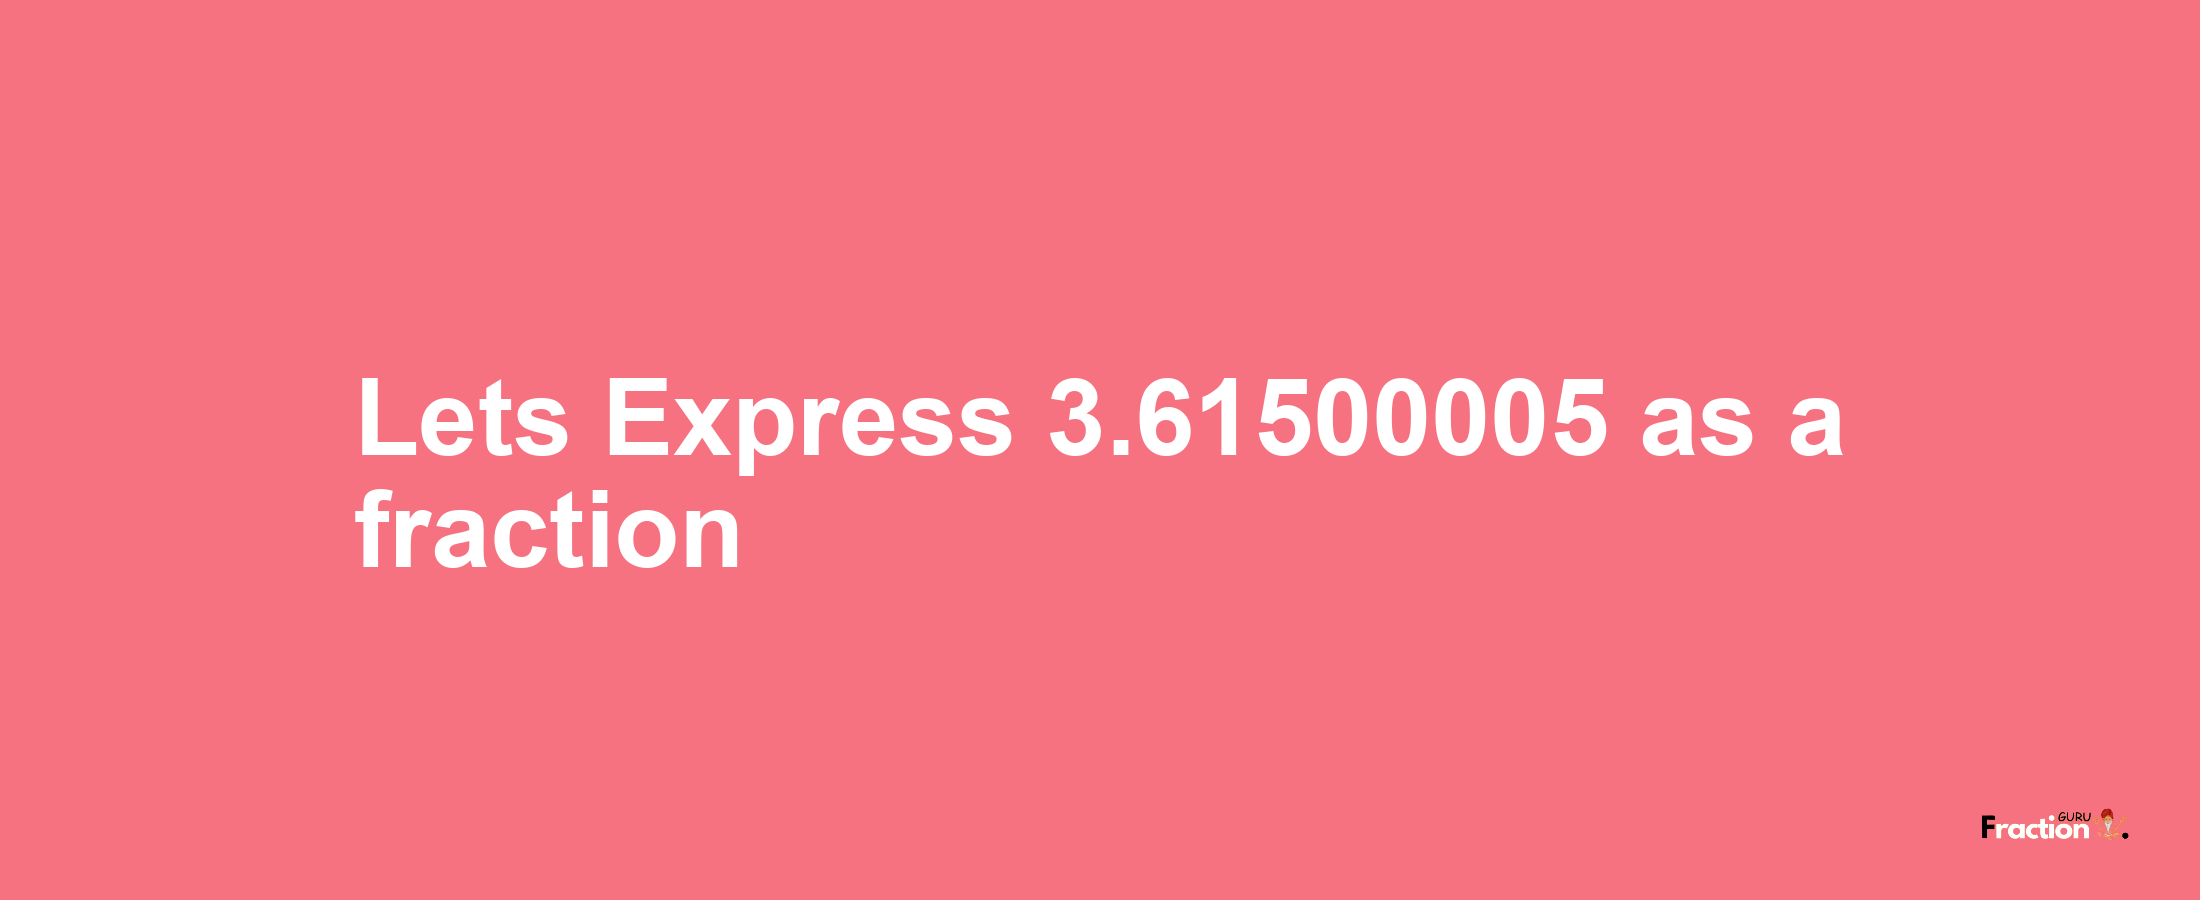 Lets Express 3.61500005 as afraction